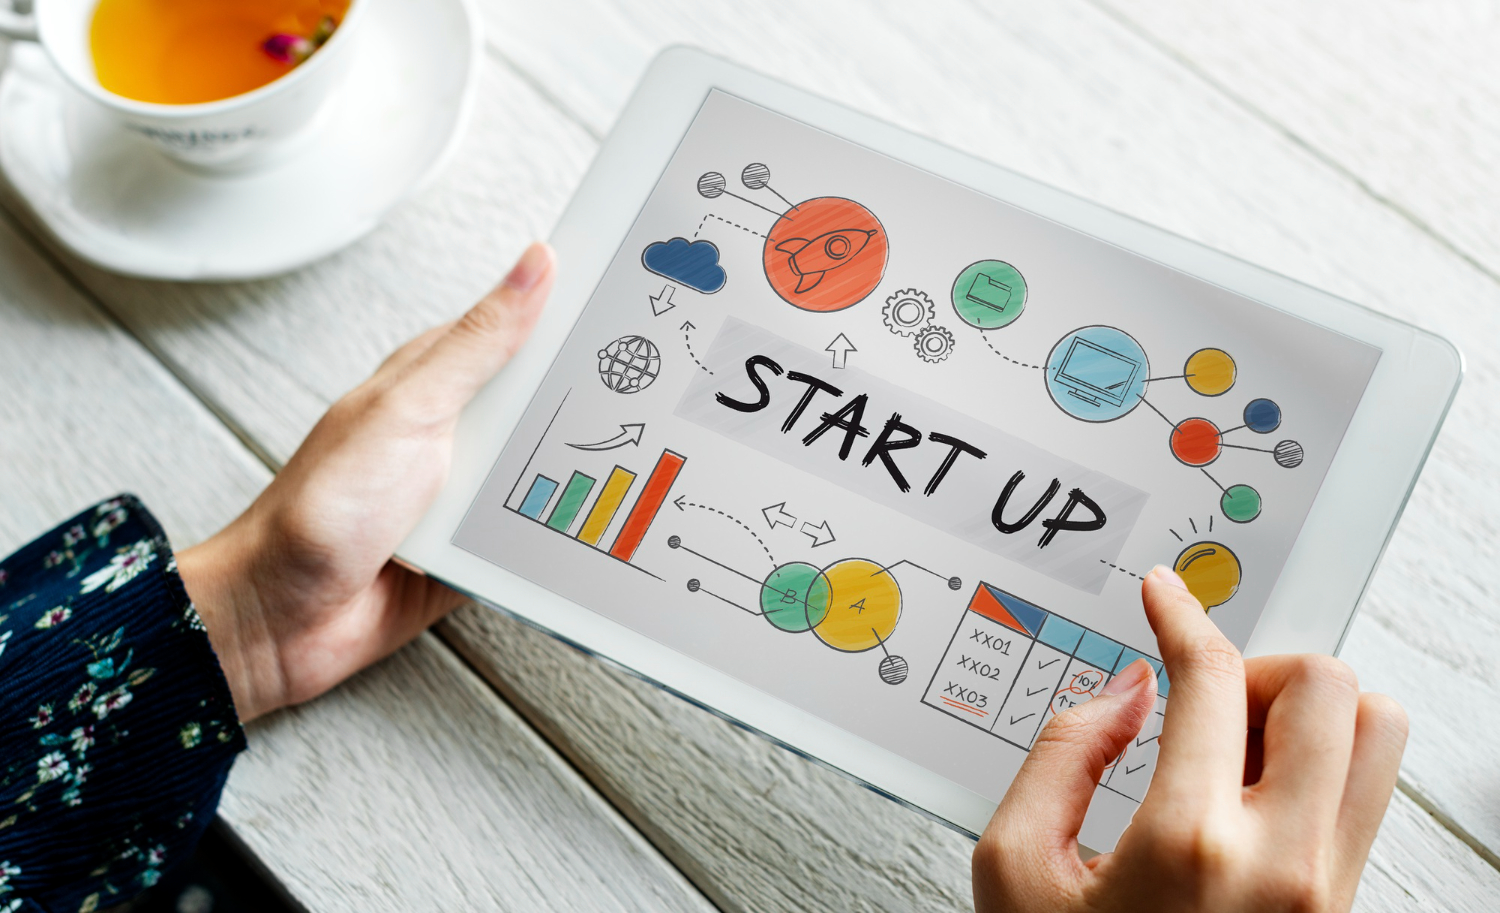 When Is the Right Time to Startup Online Business?